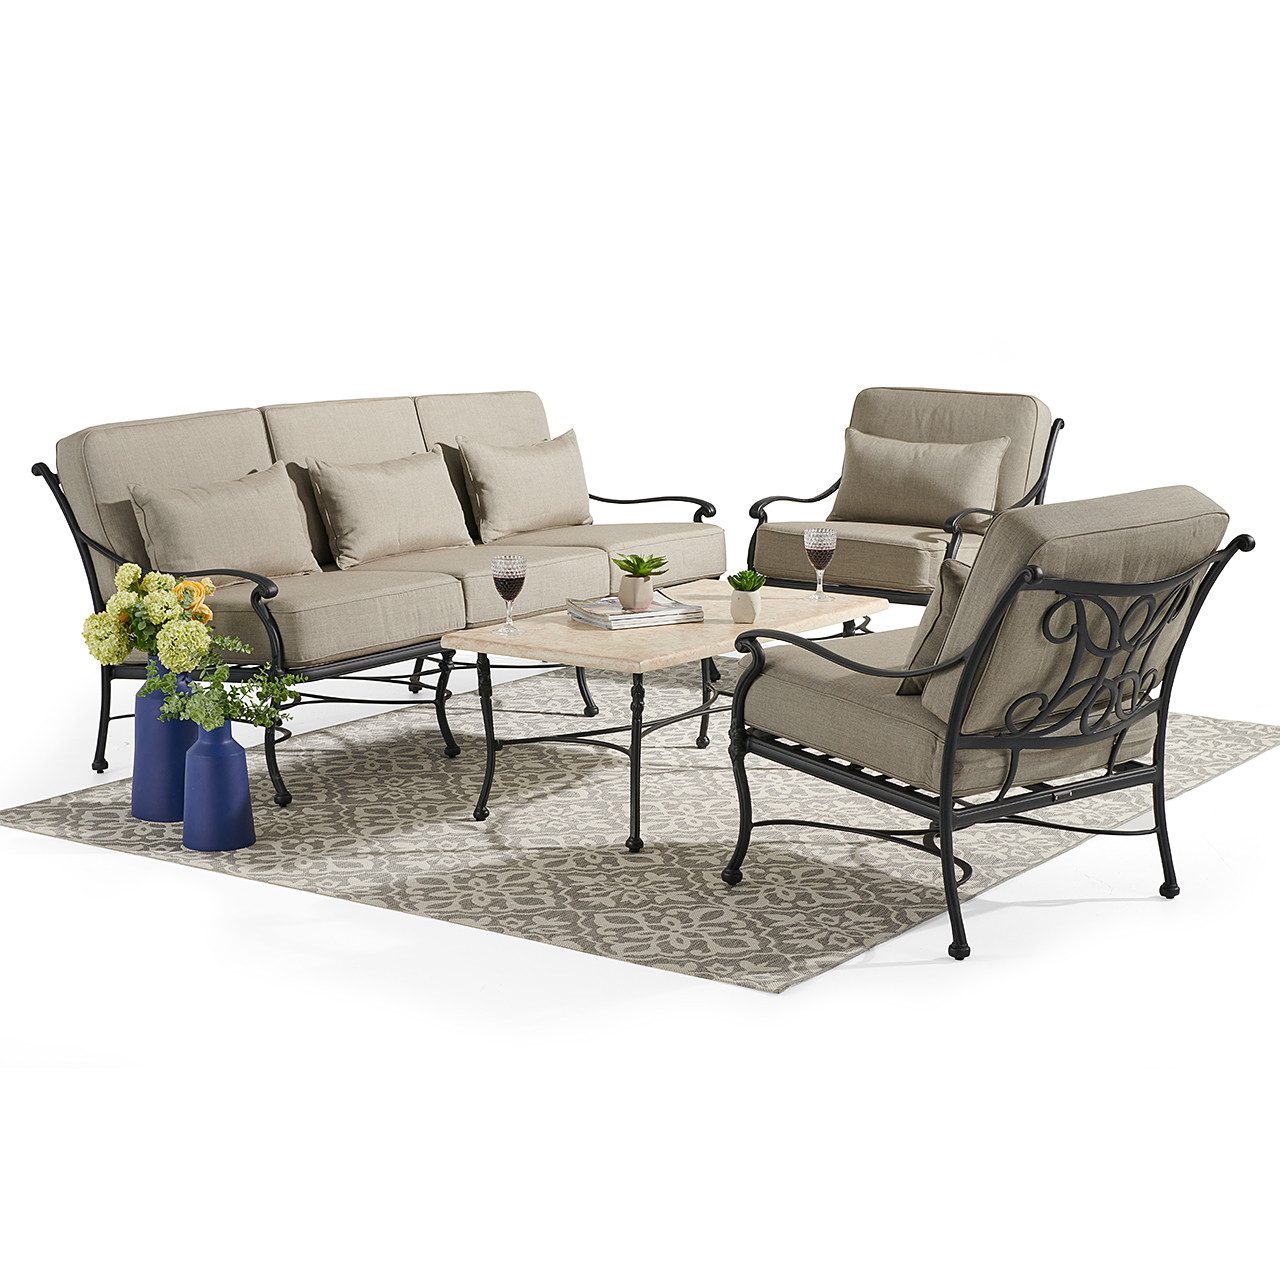 Chateau Rust Cast Aluminum and Cushion 4 Pc. Sofa Group with 44 x 24 in. Marble Top Coffee Table